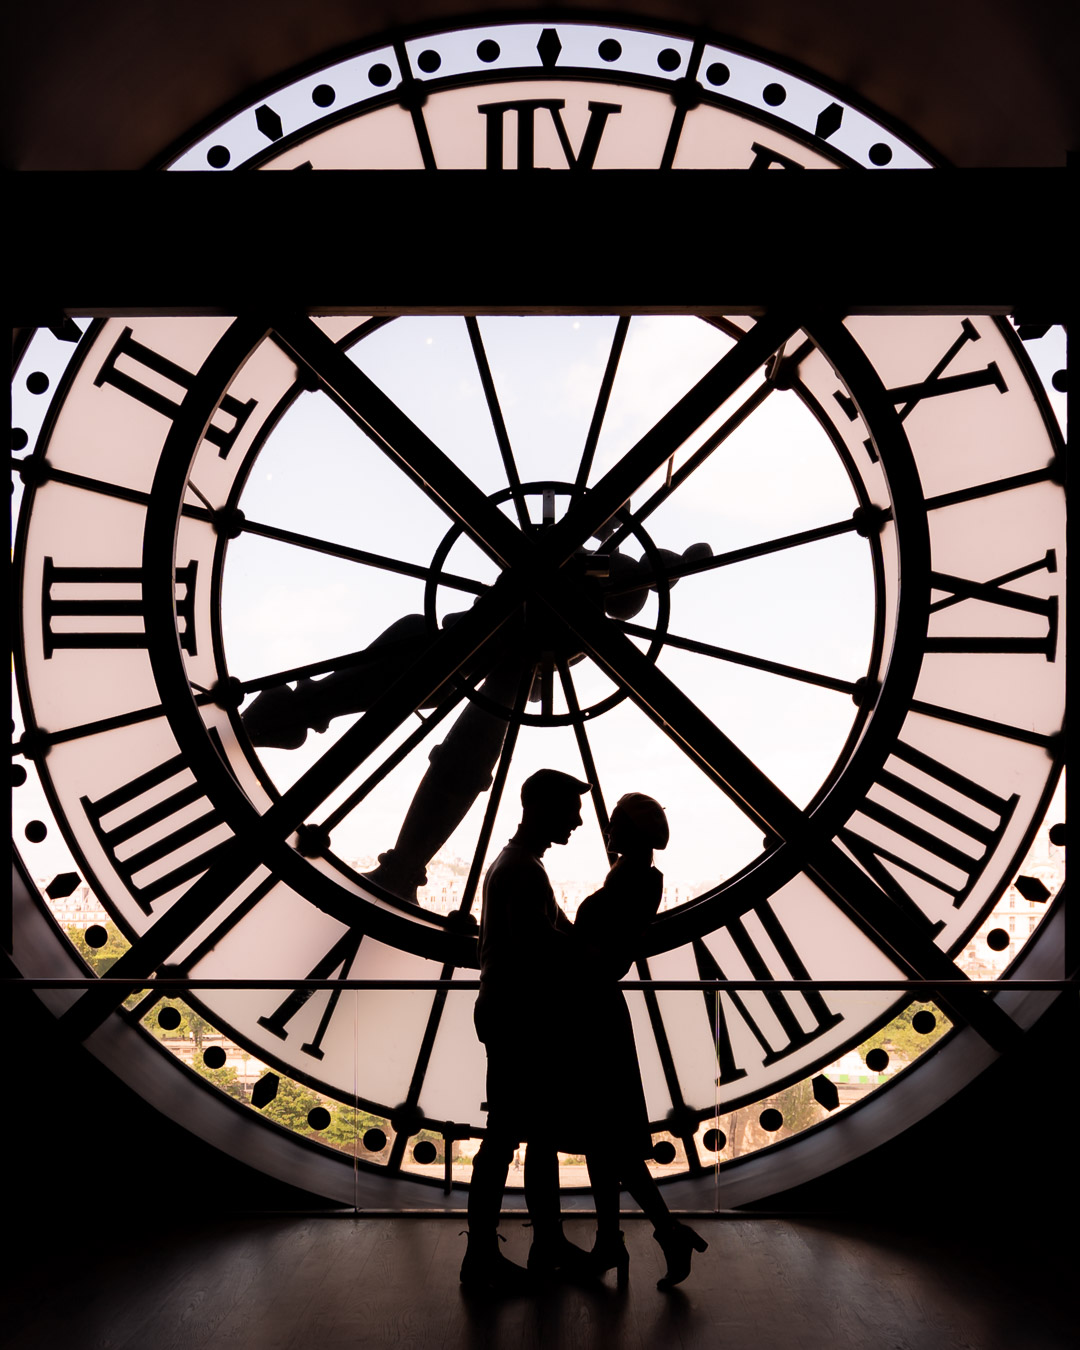 musee d'orsay clock top instagrammable places